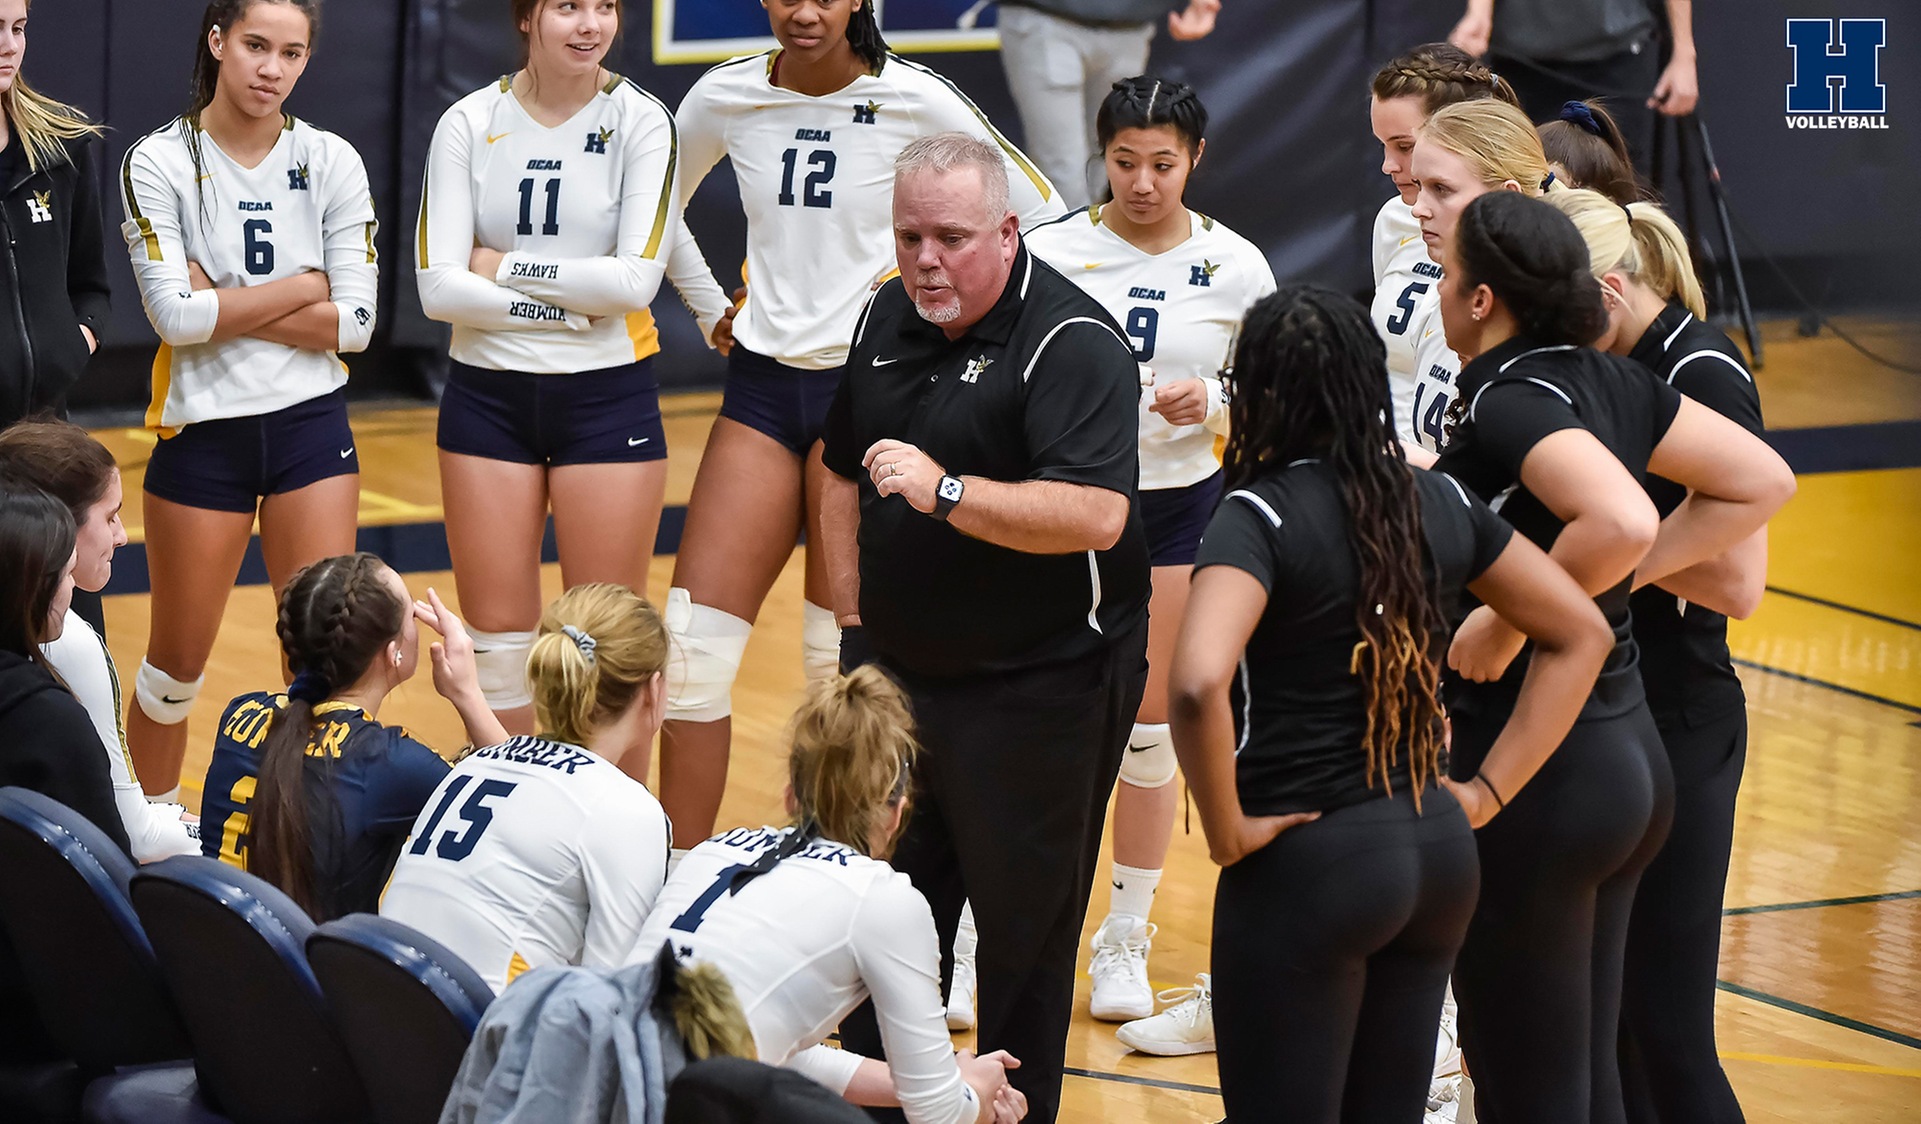 Women's Volleyball Rallies to Beat No. 14 St. Clair, 3-1